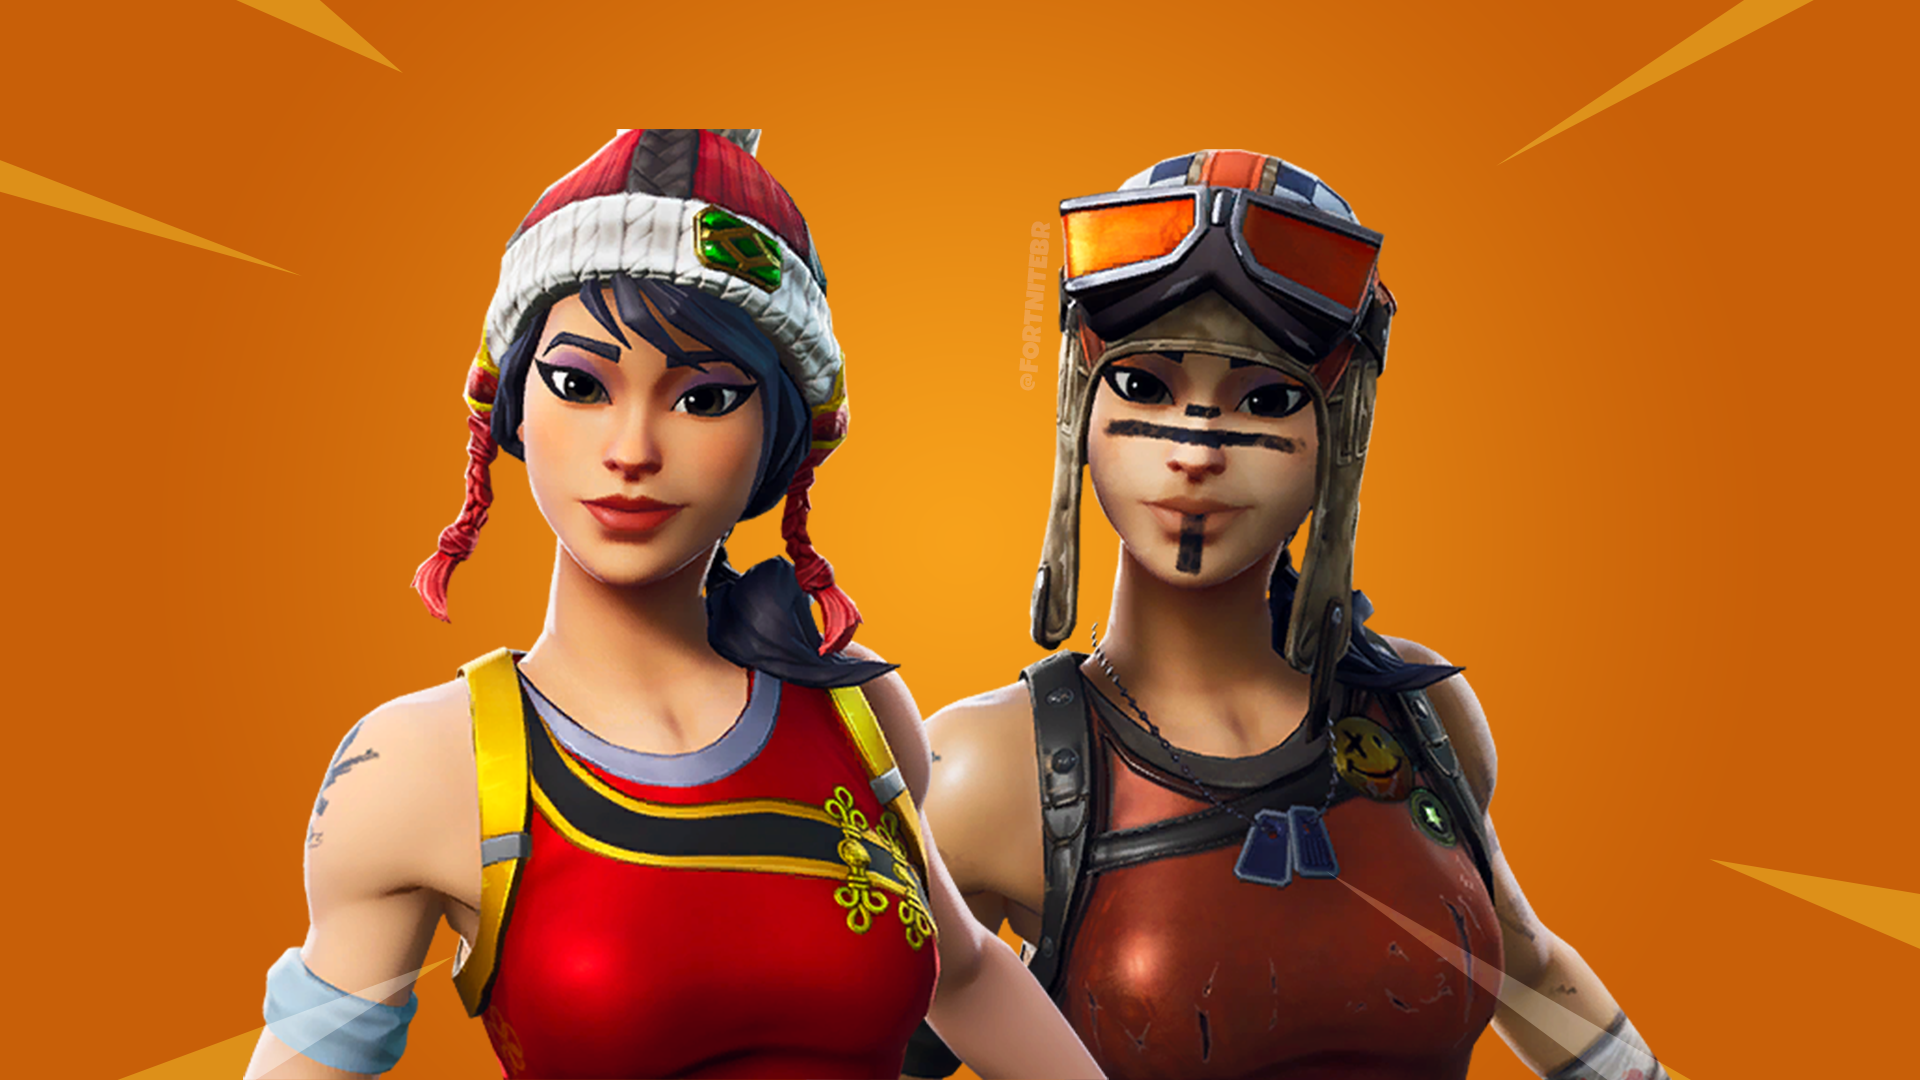 leak renegade raider whiteout and more fortnite outfits to gain new variants fortnite news - fortnite renegade raider coming back